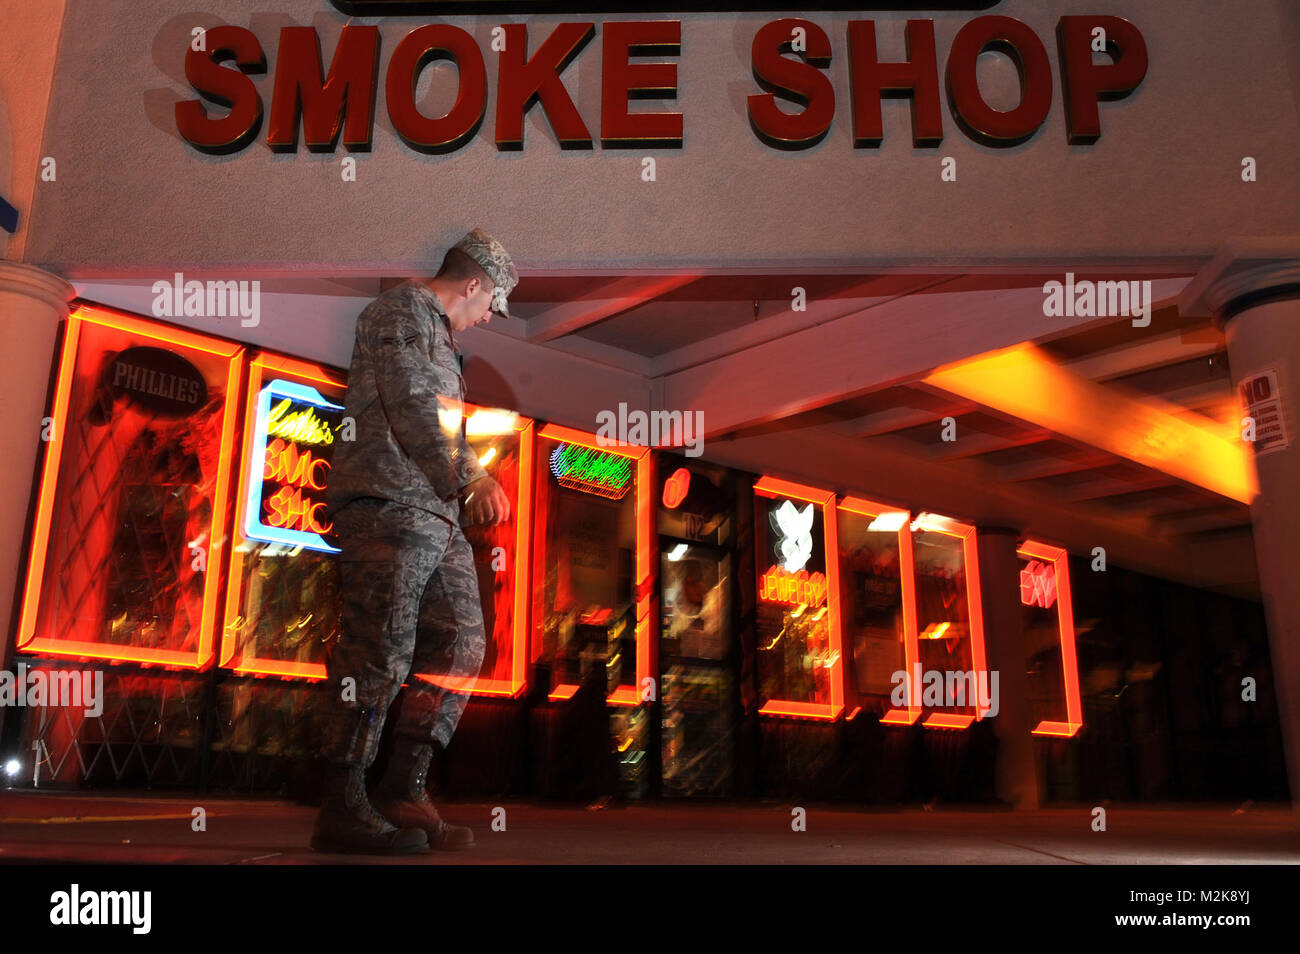 A U.S. Airman leaves a smoke shop near Nellis Air Force Base, Nev., Oct. 28, 2010. Many shops sold Spice and other substances that produce effects similar to those of marijuana. While the items were banned by the Department of Defense, they were legal in the civilian community until Nov. 24, when the Drug Enforcement Administration enacted a nationwide ban on Spice and similar products. (U.S. Air Force photo illustration by Tech. Sgt. Michael R. Holzworth/Released) tobacco-free-living-101028-F-3431H-333 by MilitaryHealth Stock Photo